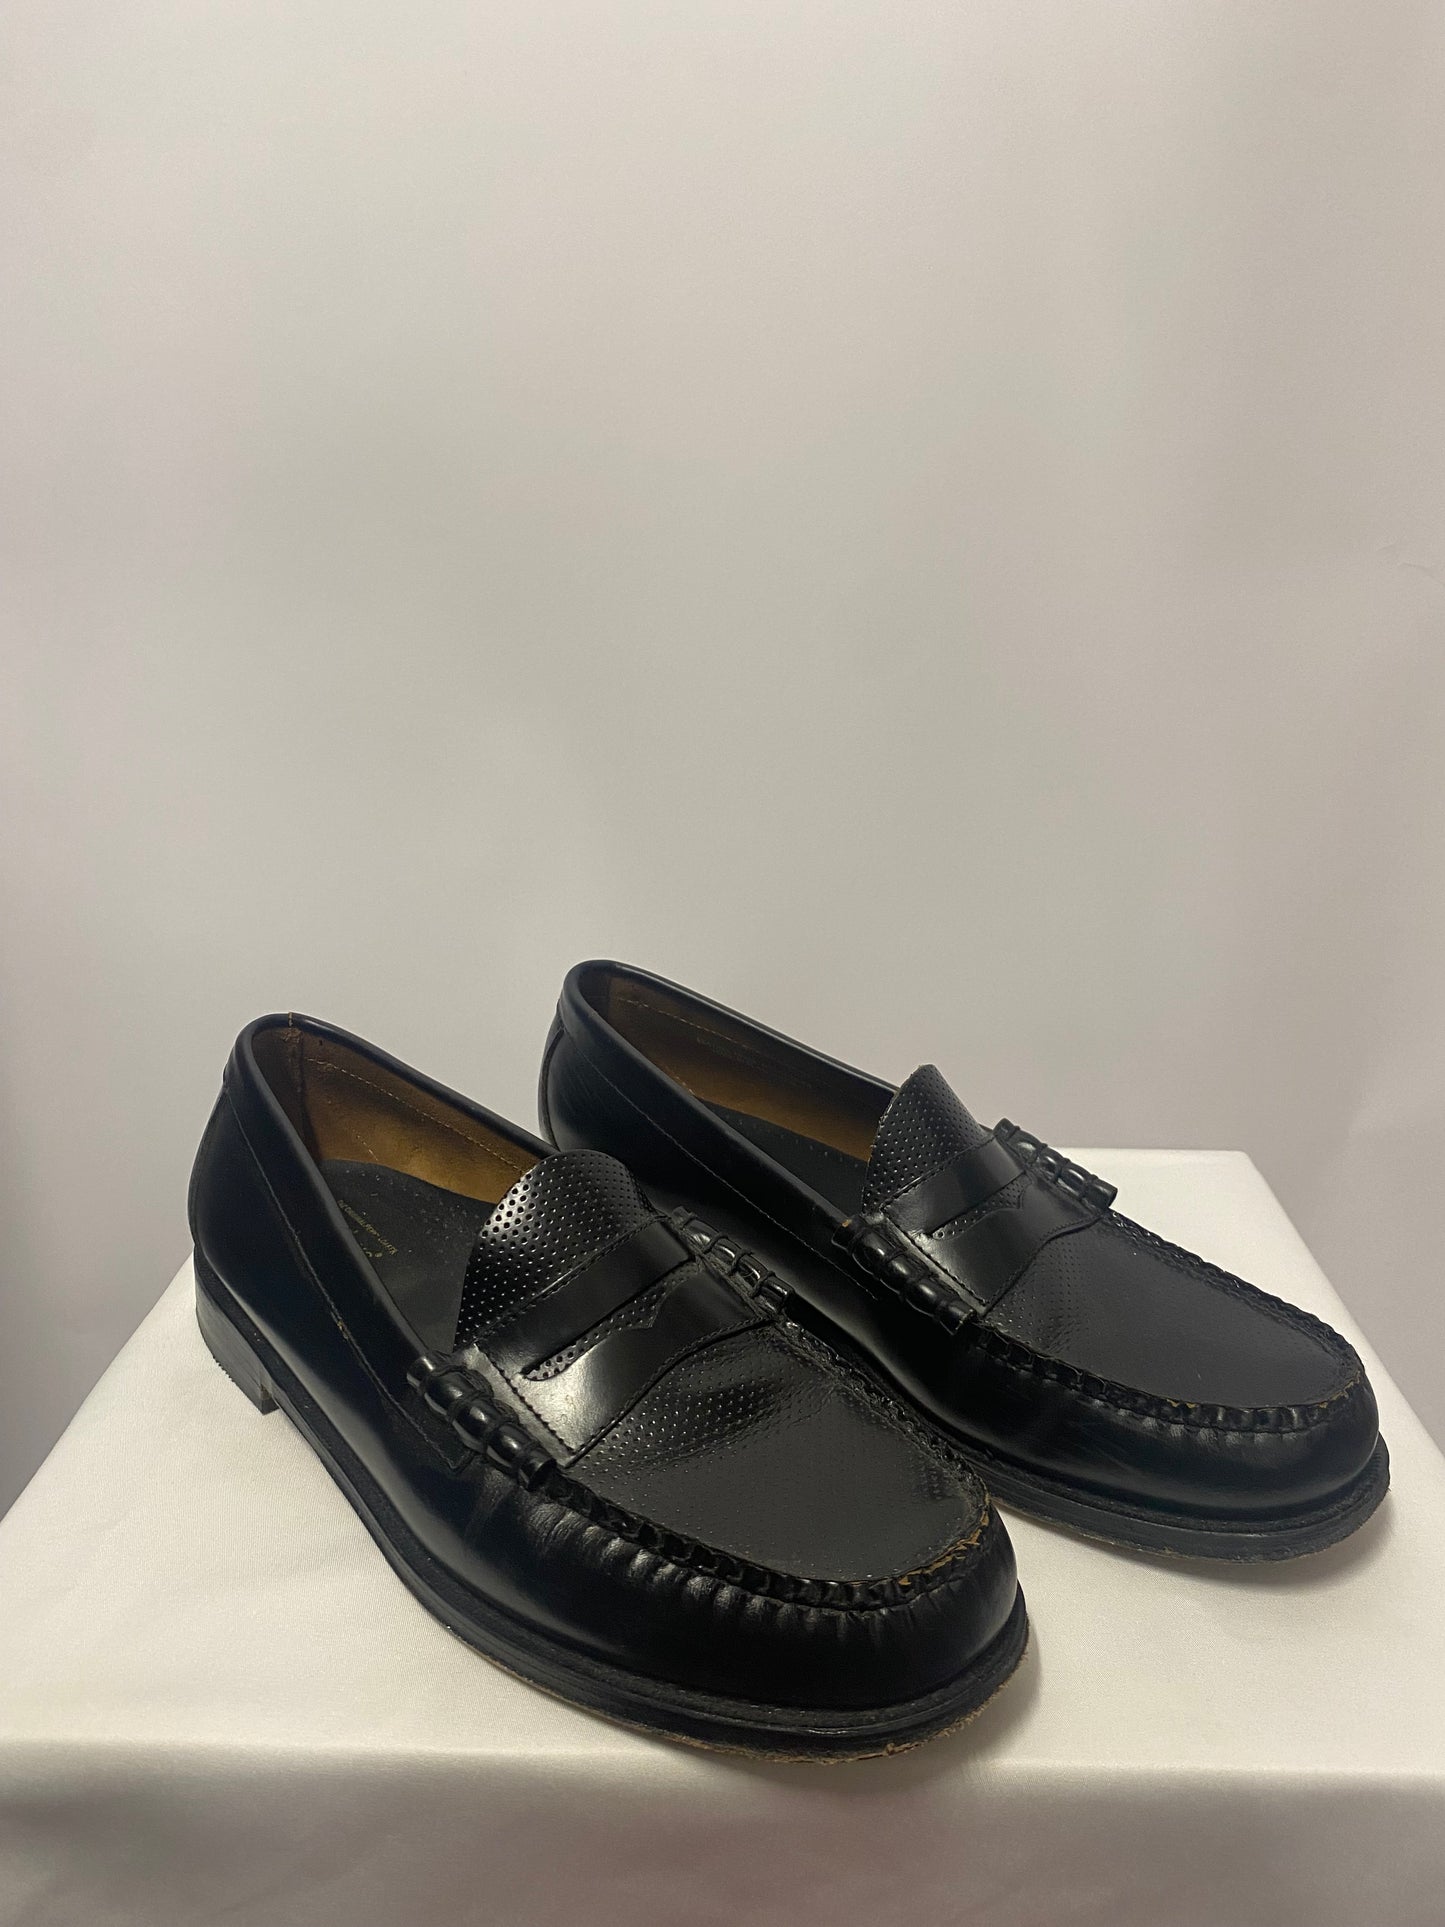 Weejun's The Original Penny Loafer Black Leather 10.5